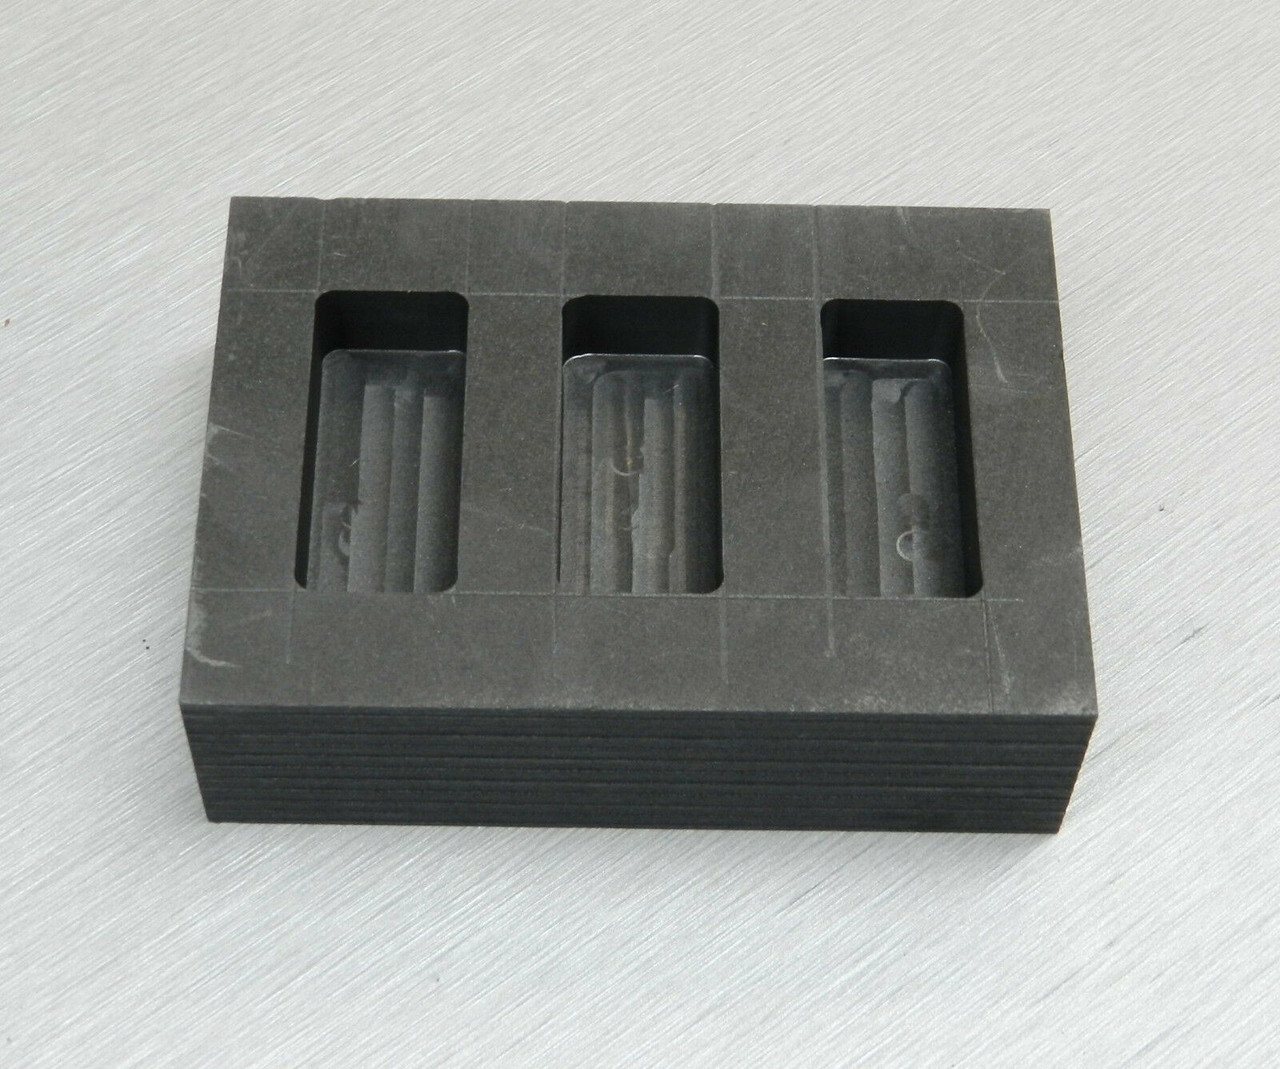 1 oz Gold Bar Cube High Density Graphite Mold 1/2 Silver 6-Cavities Copper Made in The USA 